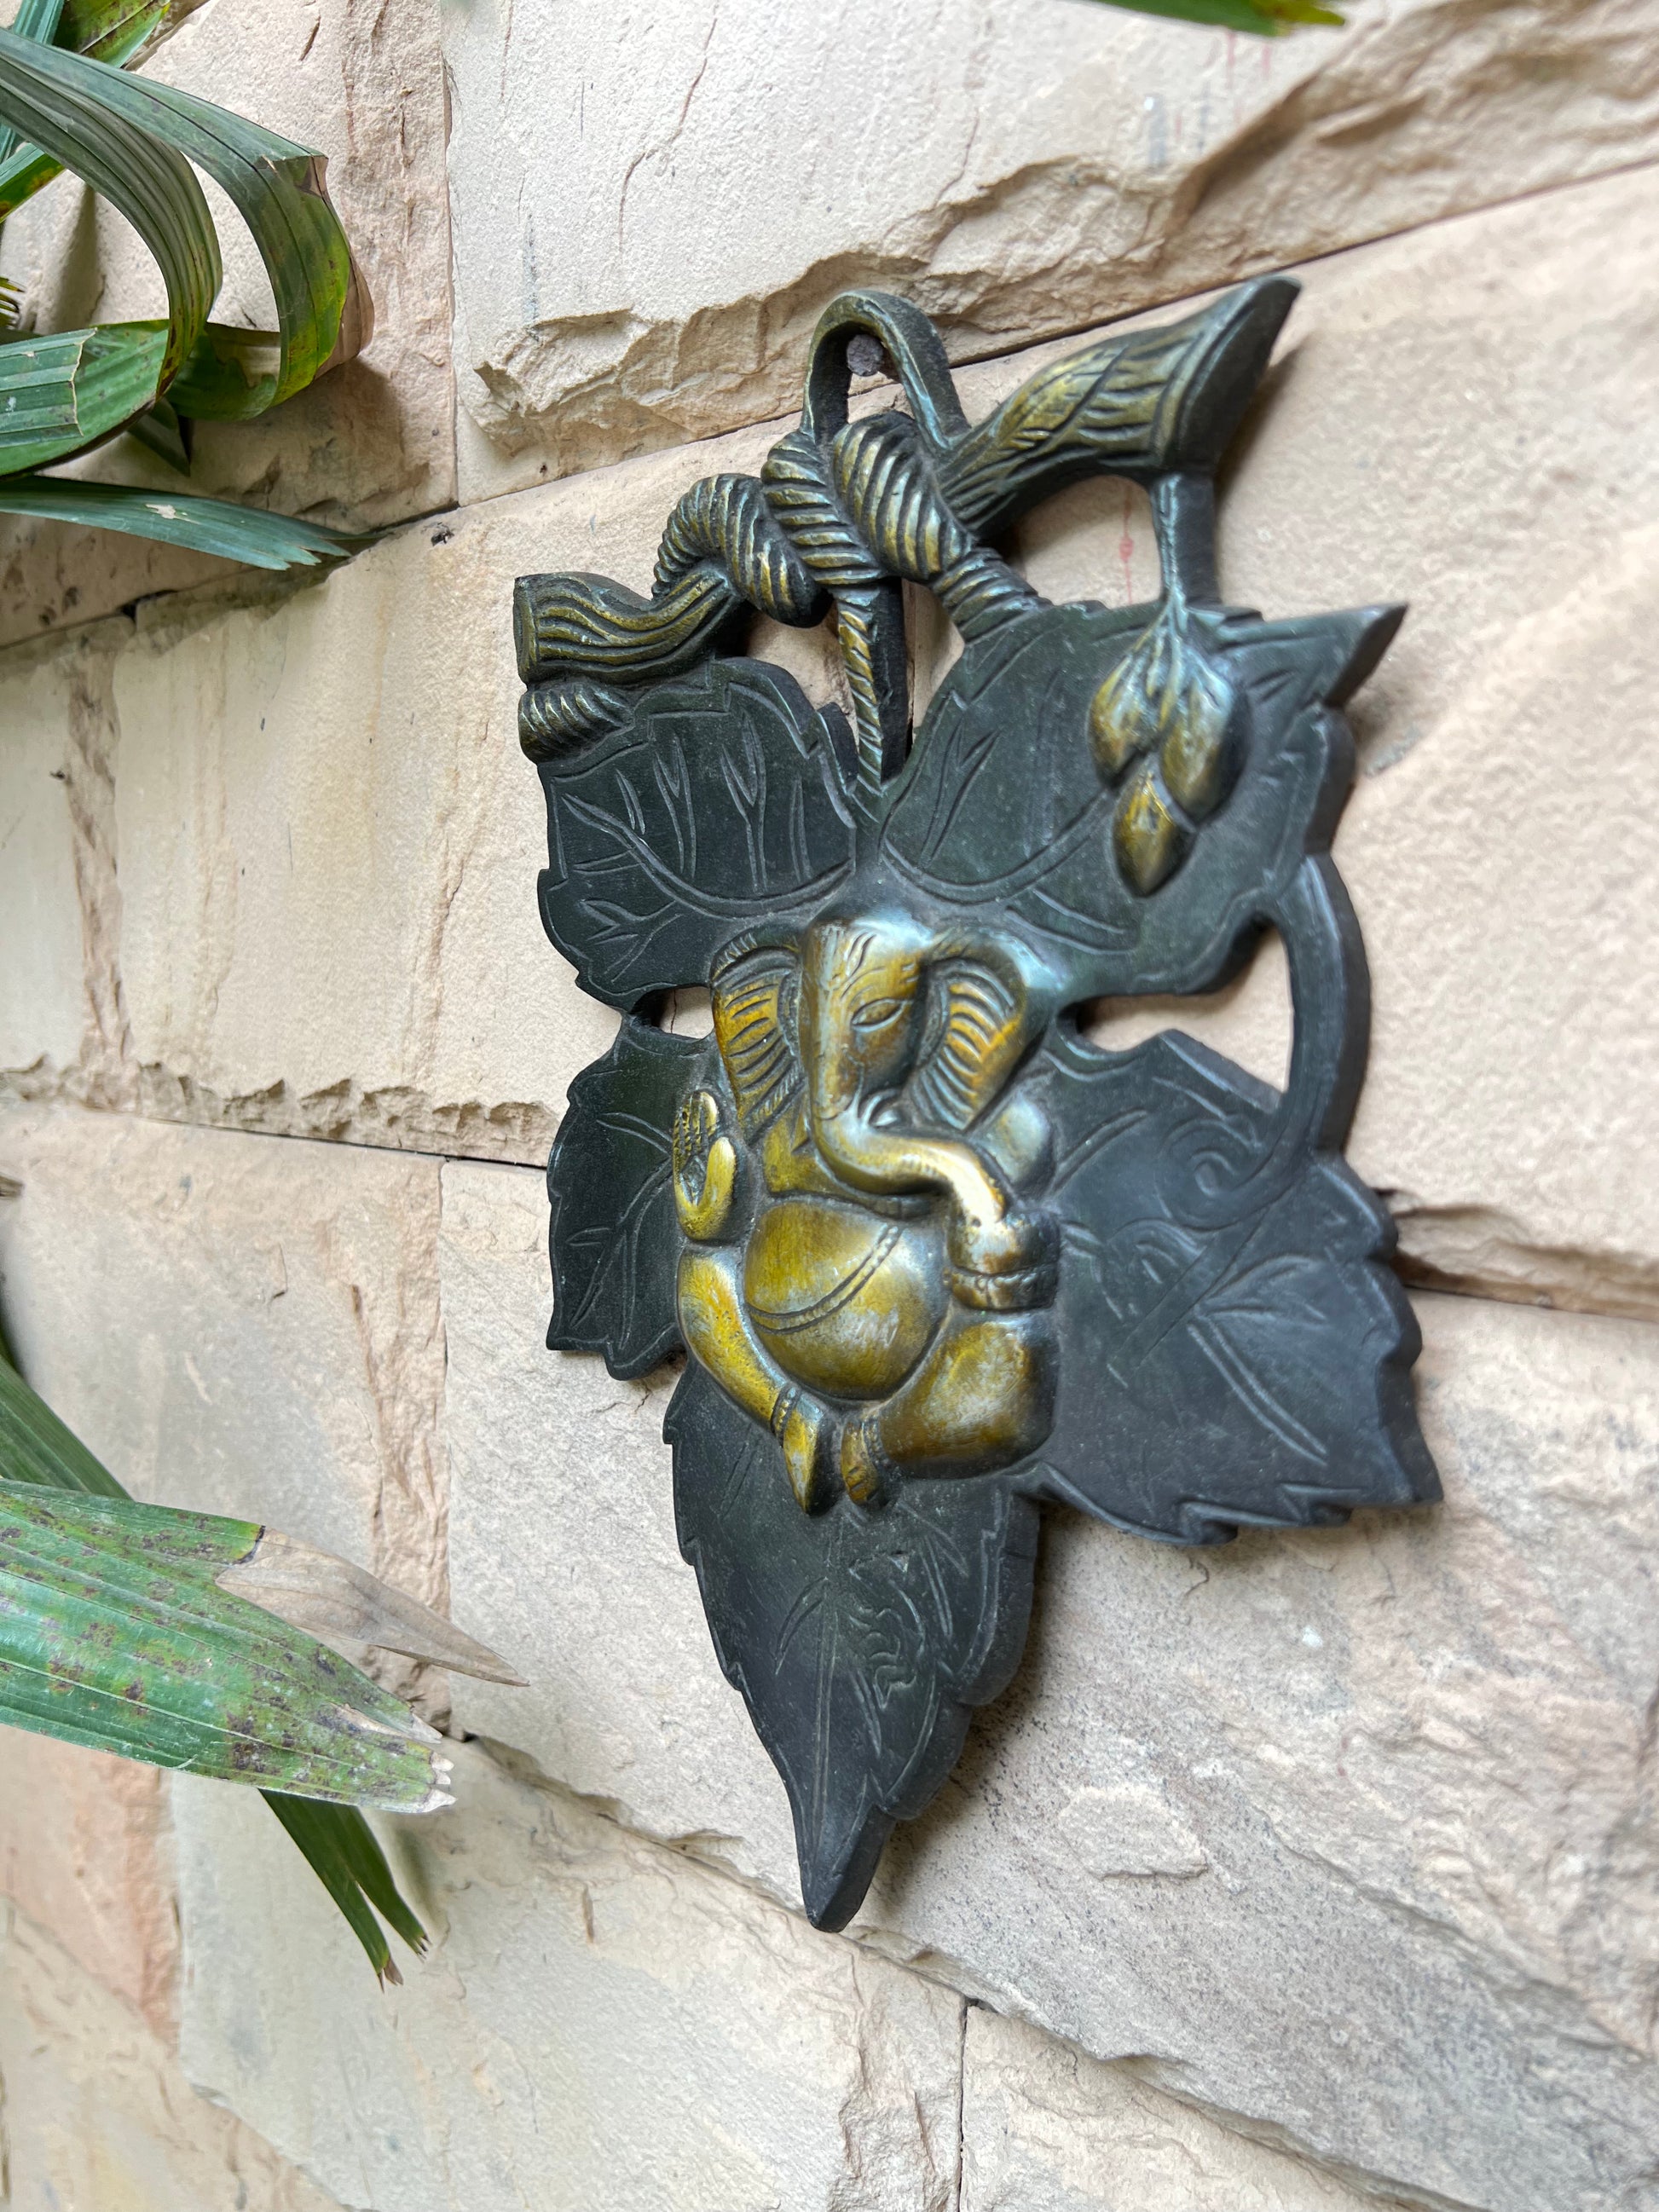 Elegant and Traditional Ganesh Iron Wall hanging.   The Source India is an Indian Handicraft, Home Decor, Furnishing and Textiles Store. Based out of Hauz Khas Village New Delhi, each piece is carefully procured to allow the enhancement of India's Culture.